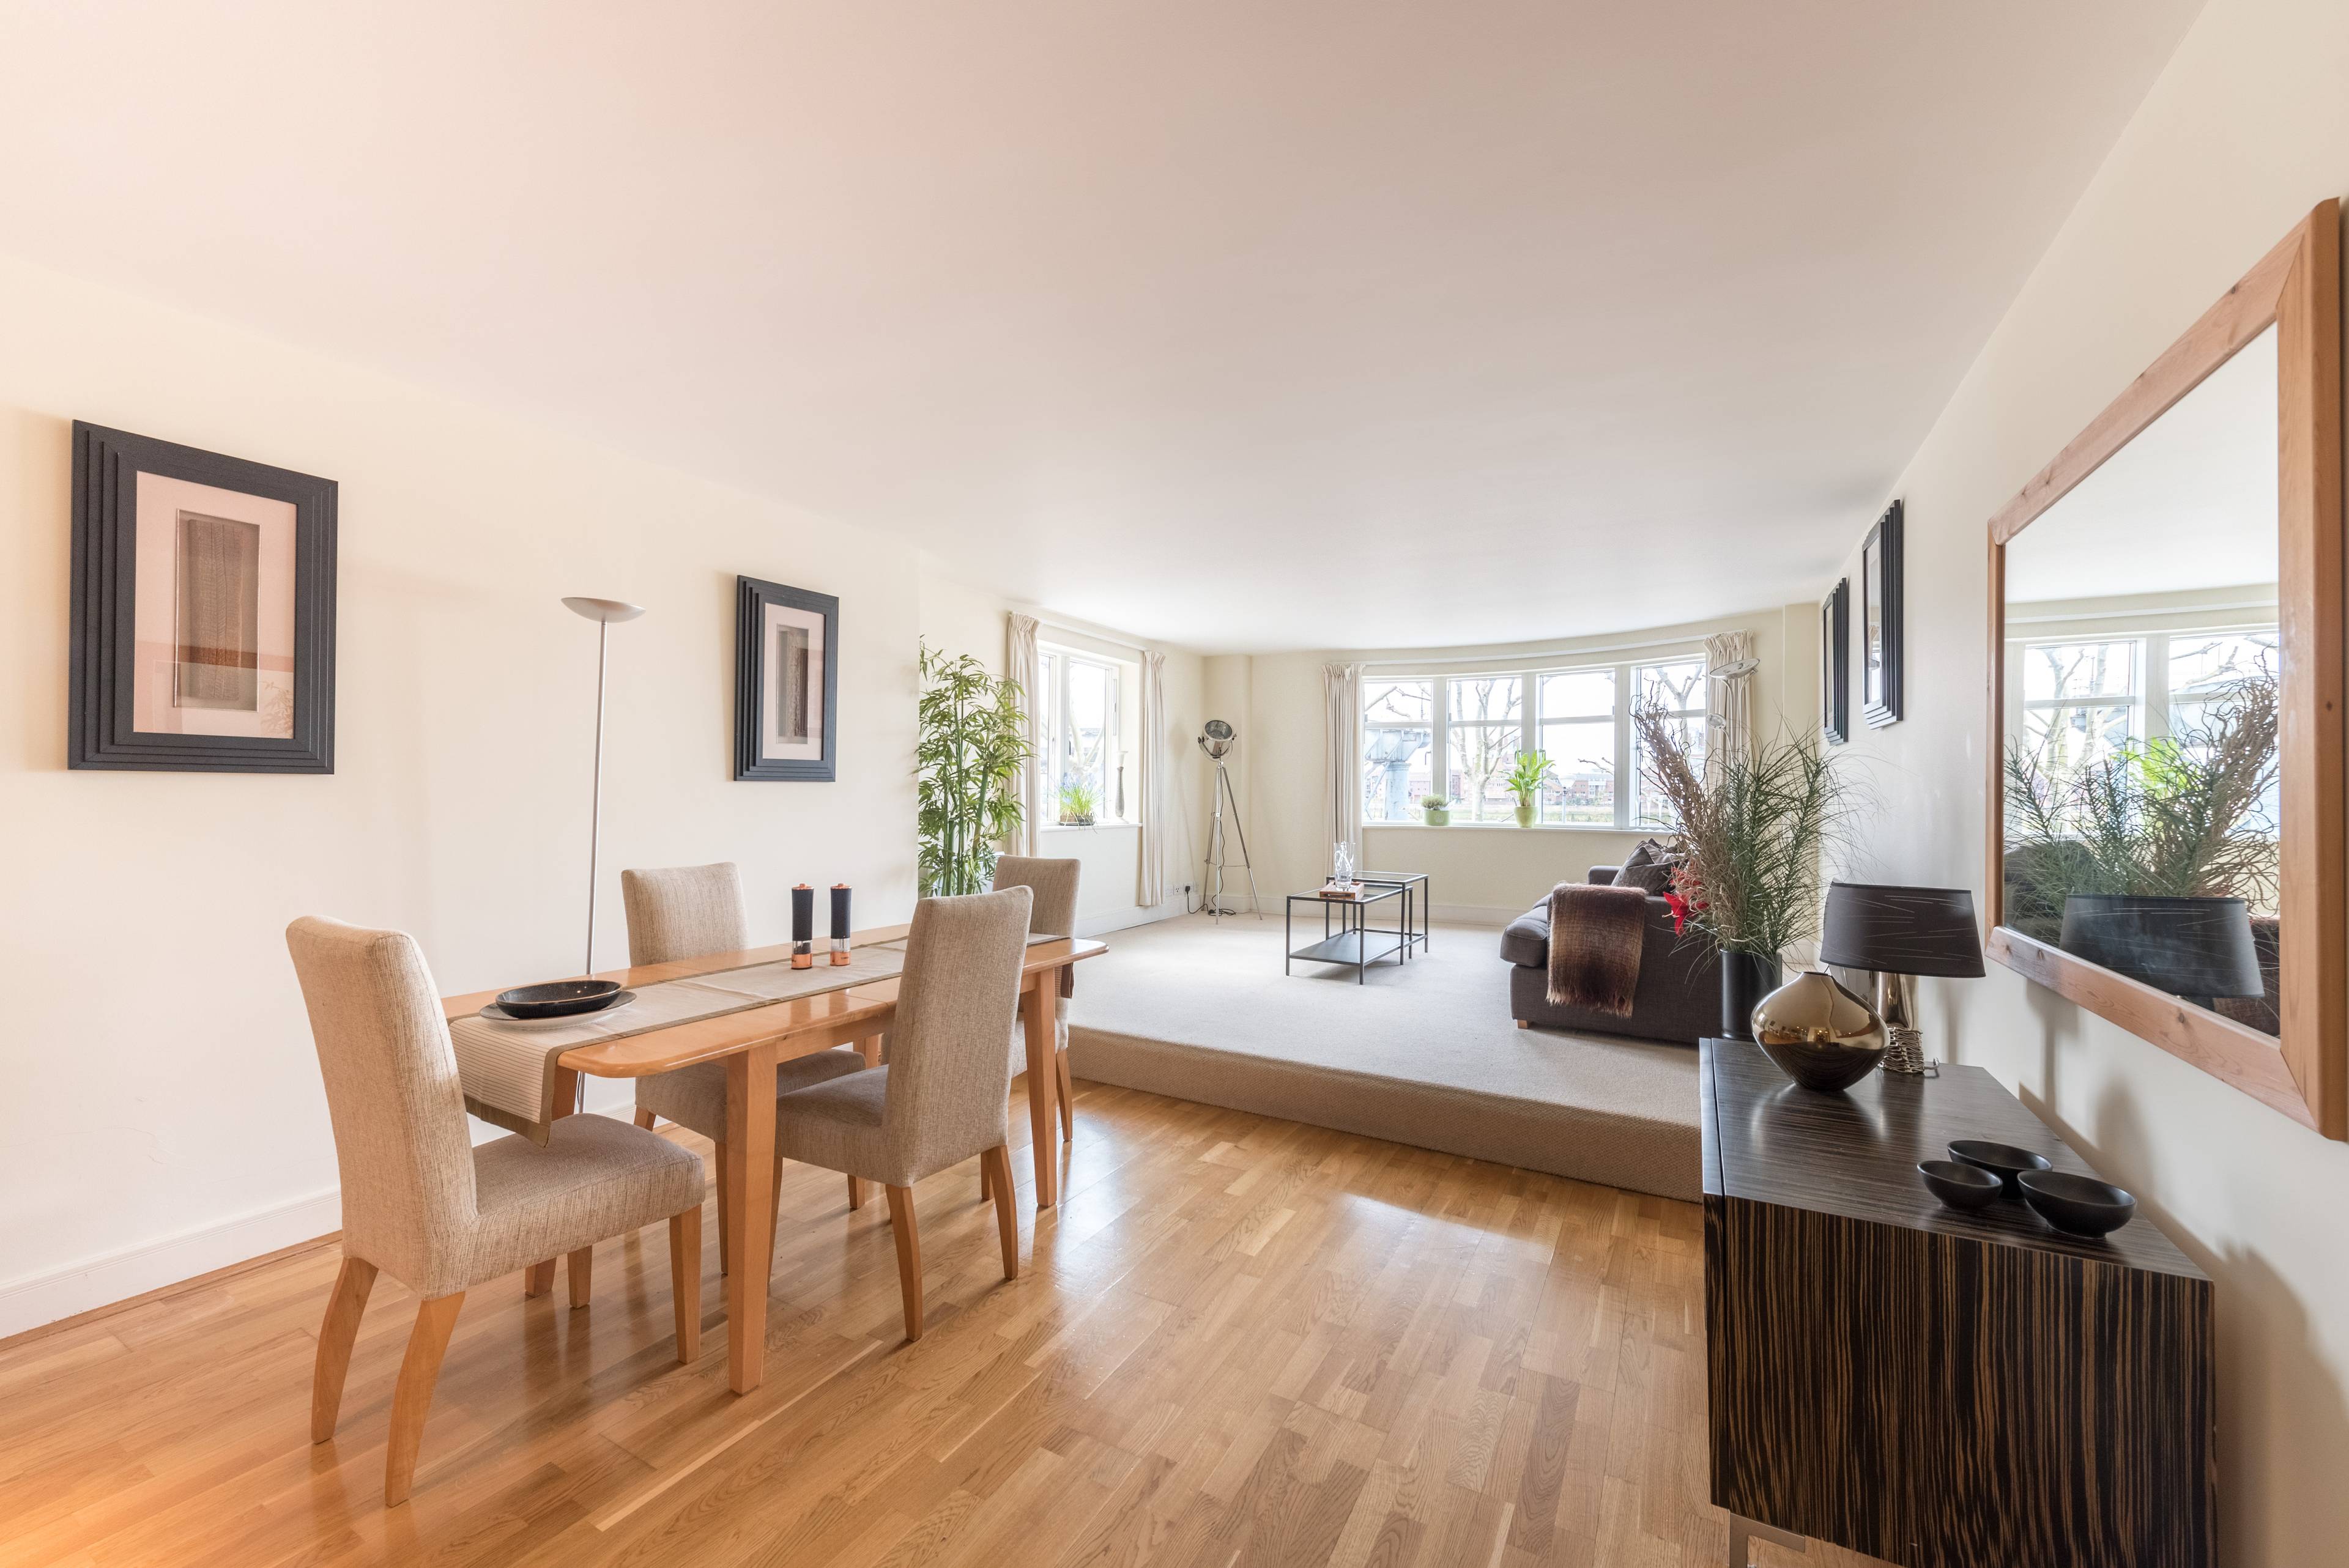 This generously spacious residence is located in a delightful riverside development just a short walk through the Thames Path to the Royal Greenwich Park.